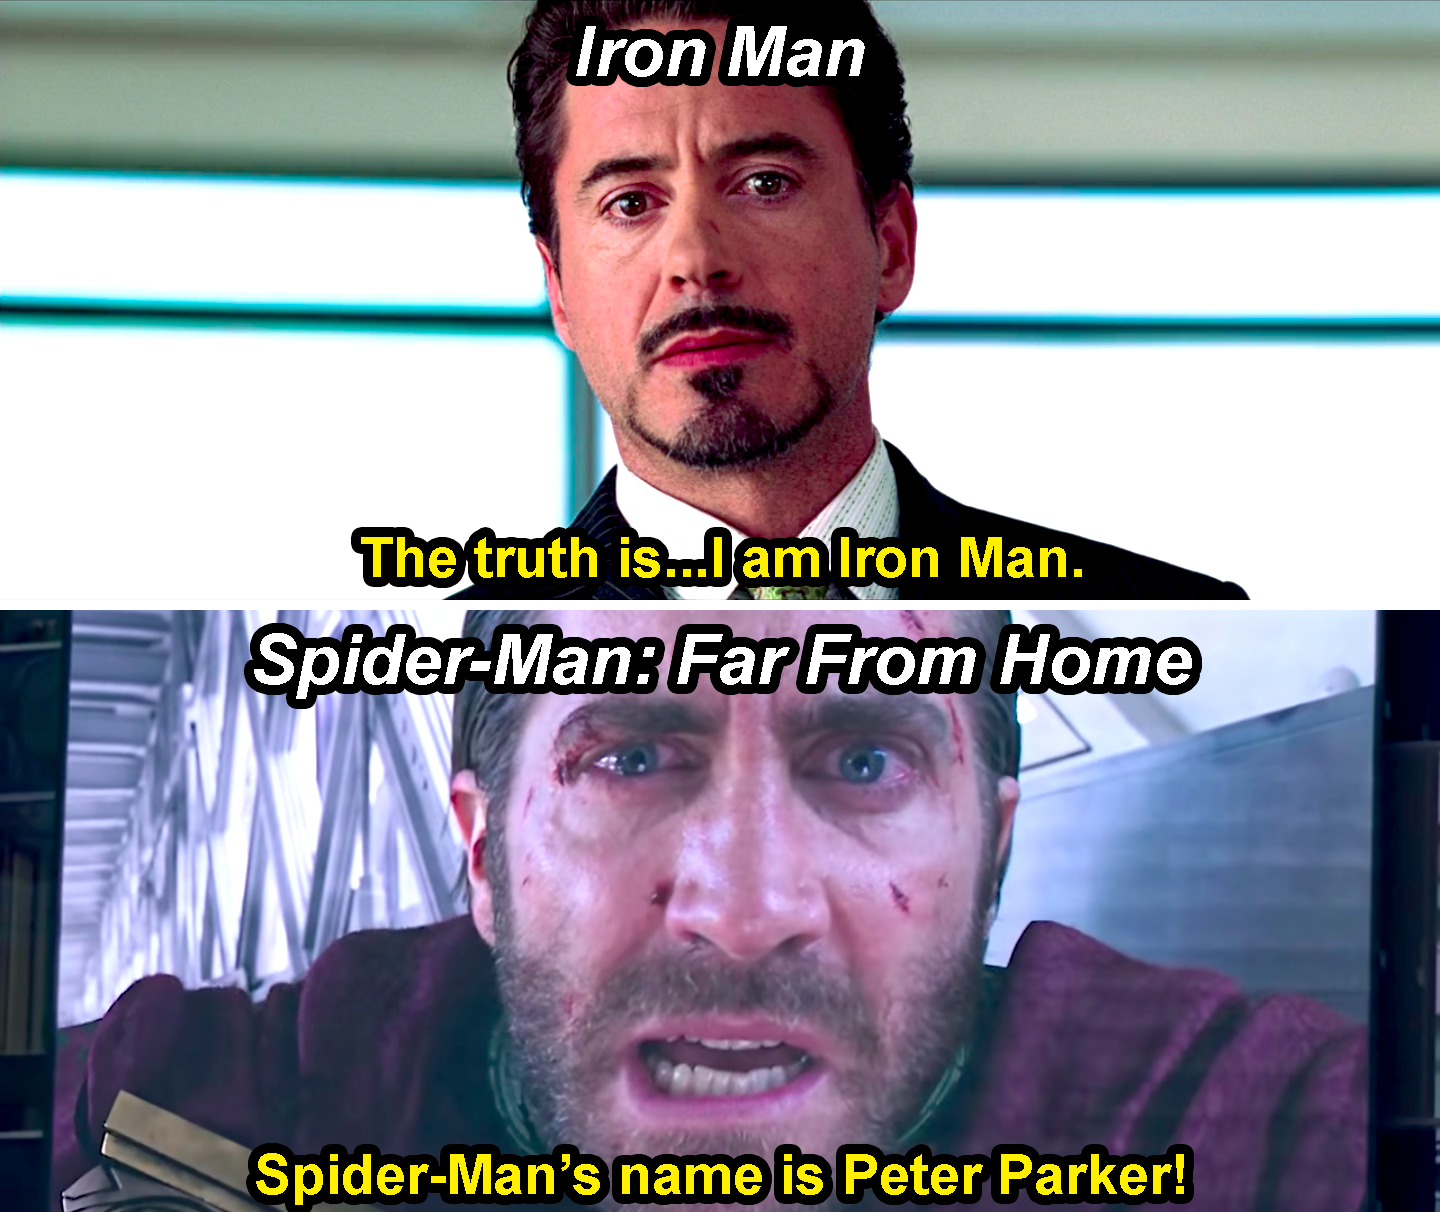 Tony saying, &quot;The truth is I am Iron Man,&quot; in Iron Man and Mysterio saying, &quot;Spider-Man&#x27;s name is Peter Parker,&quot; in Far From Home